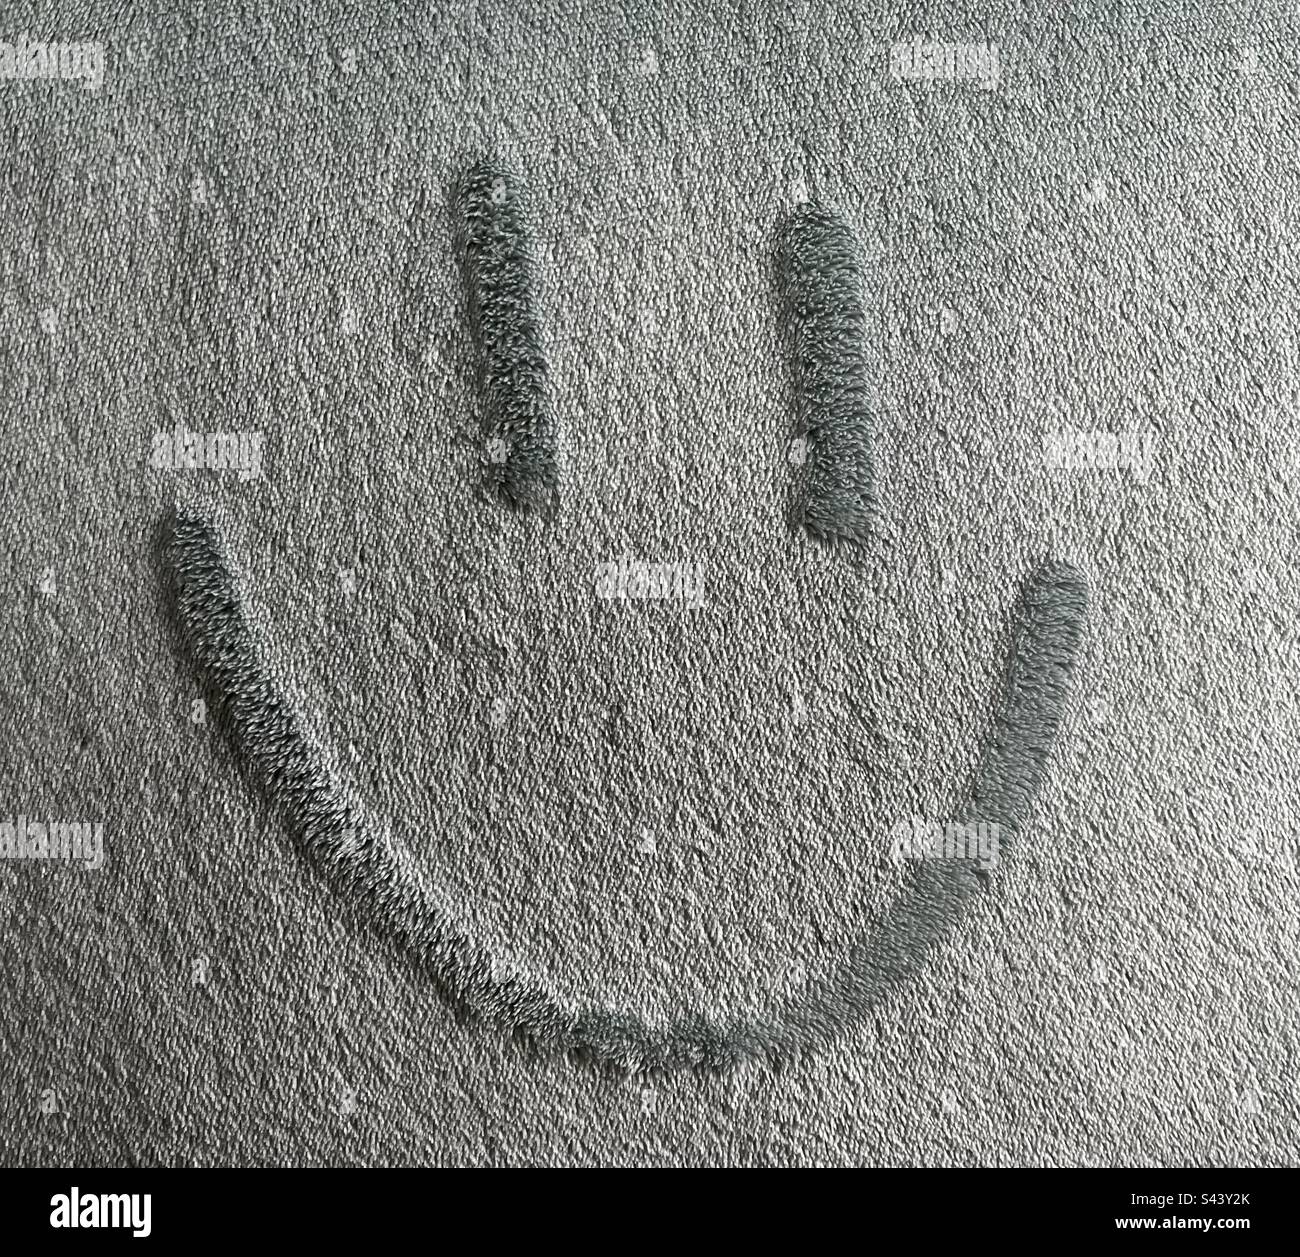 Smiley face on soft blue fabric Stock Photo